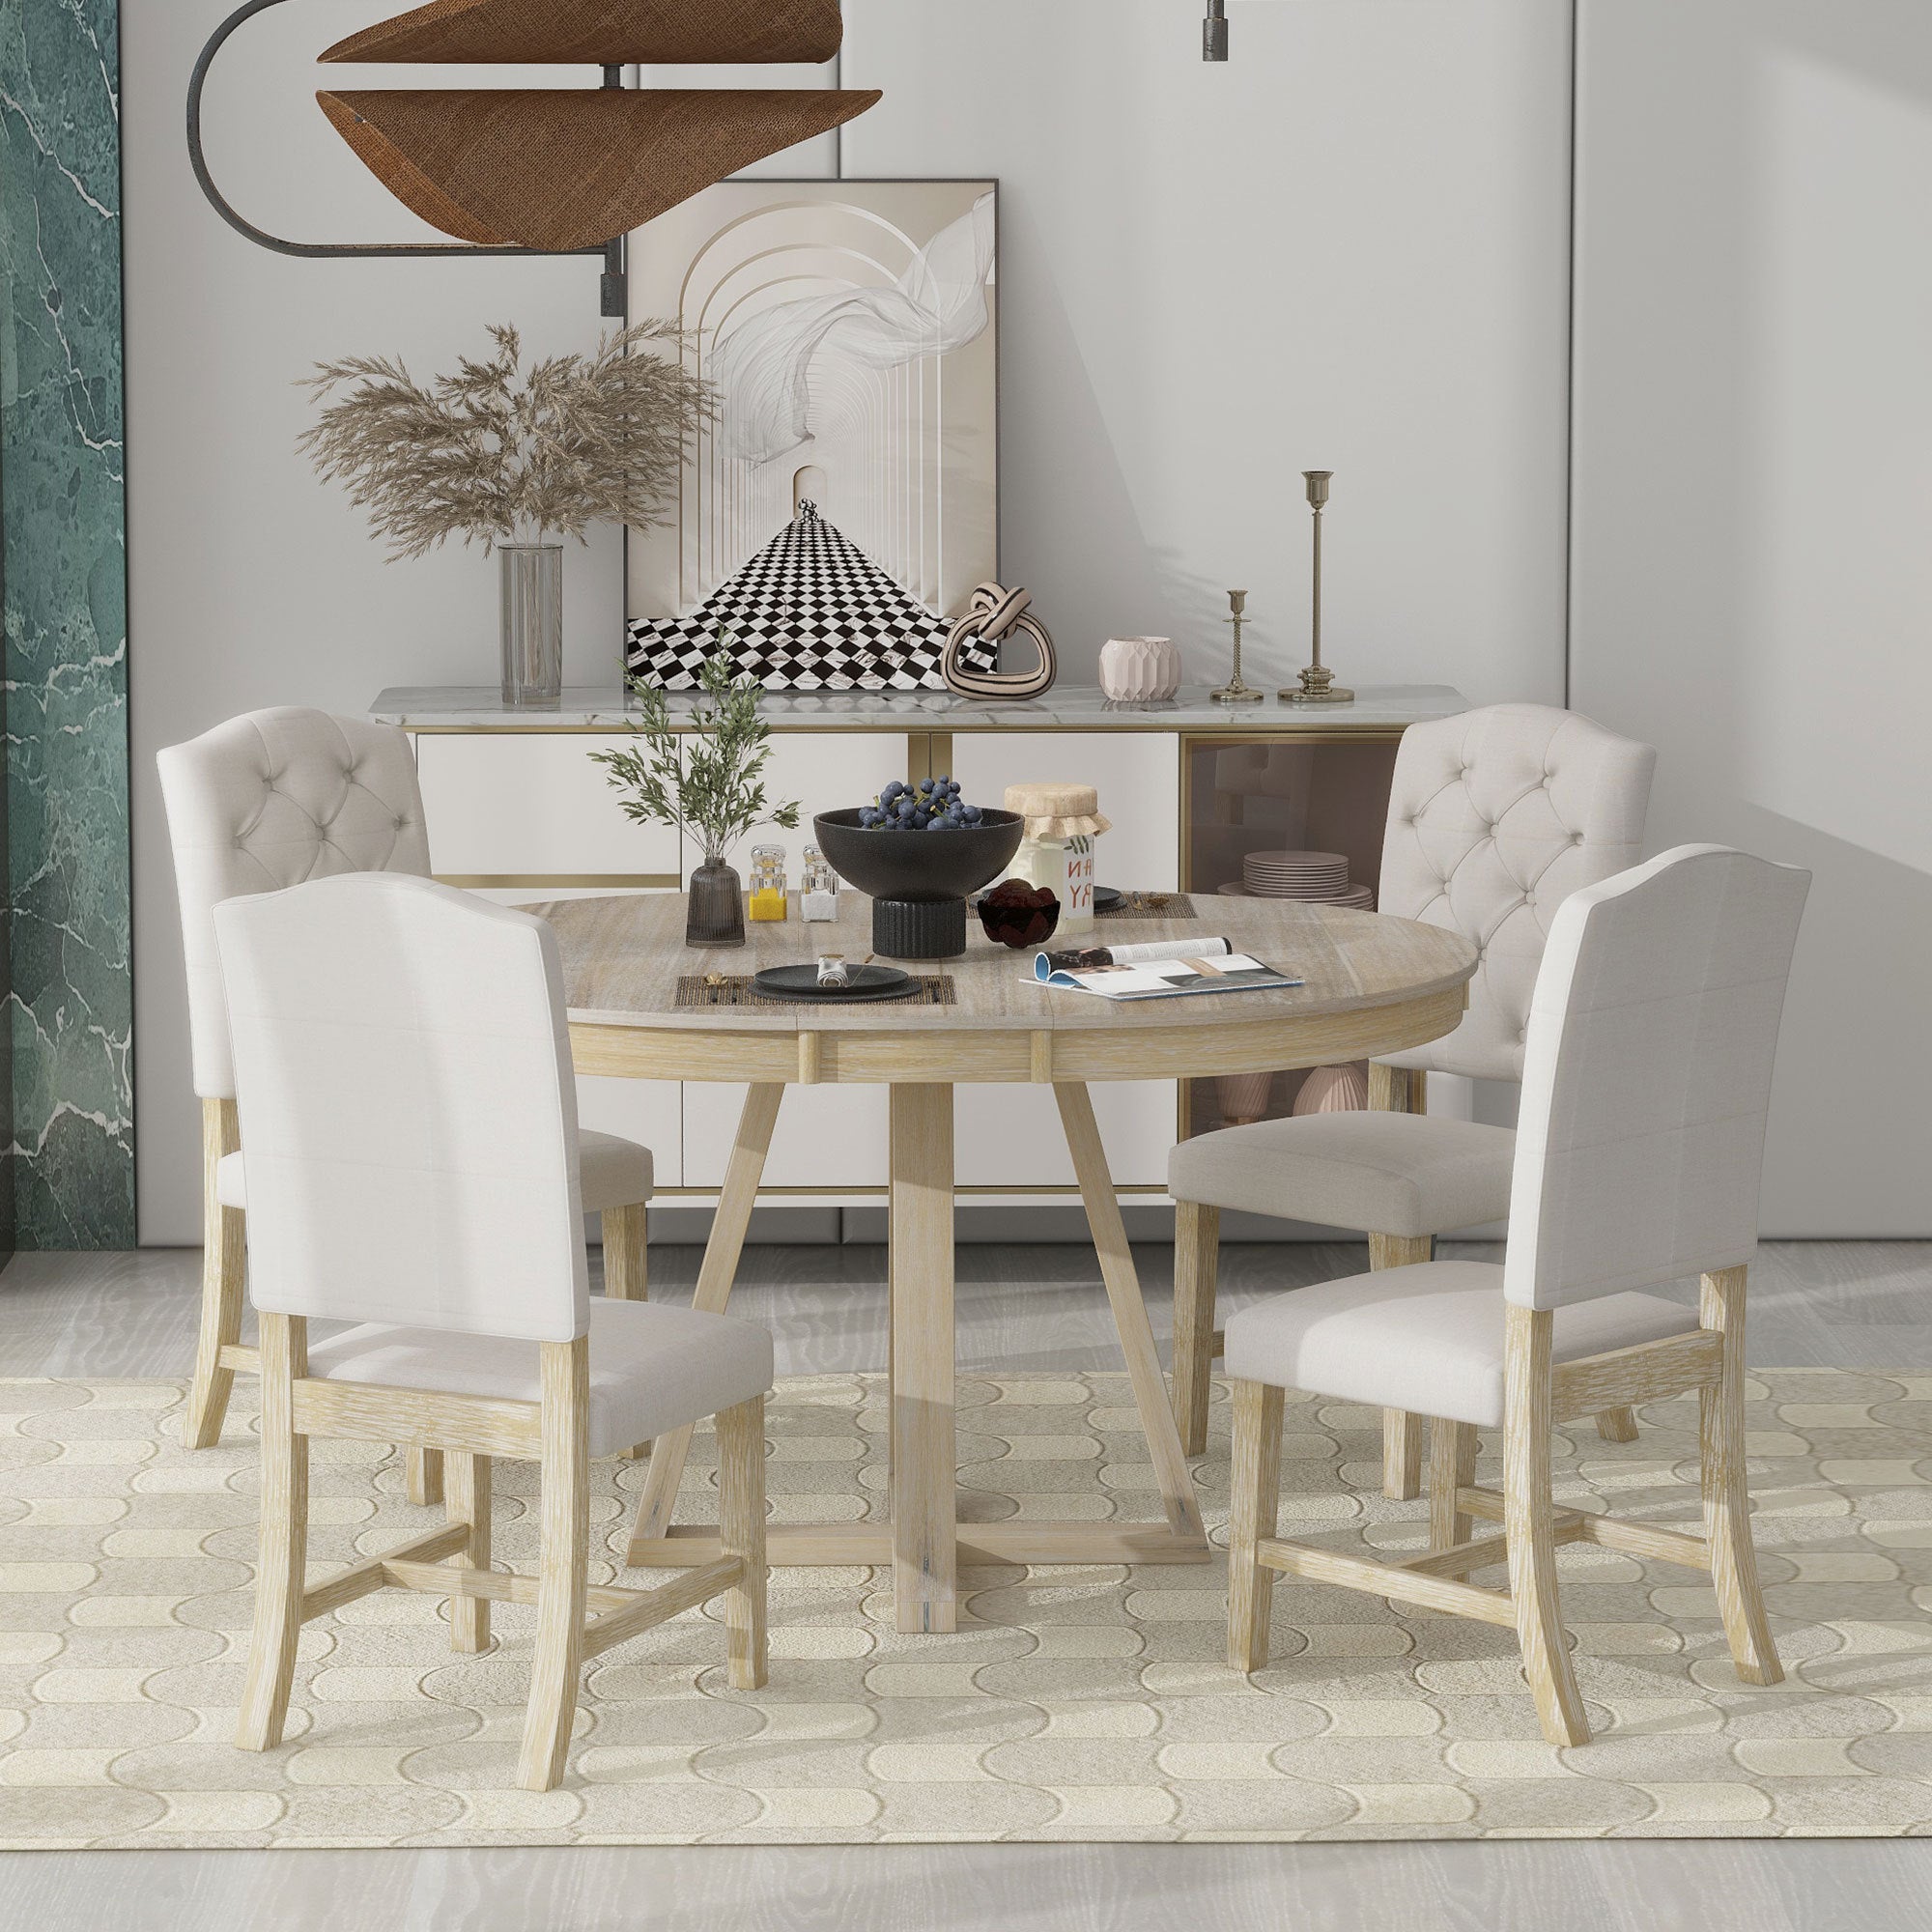 5-Piece Retro Functional Dining Set, Round Table with a 16"W Leaf and 4 Upholstered Chairs - Natural